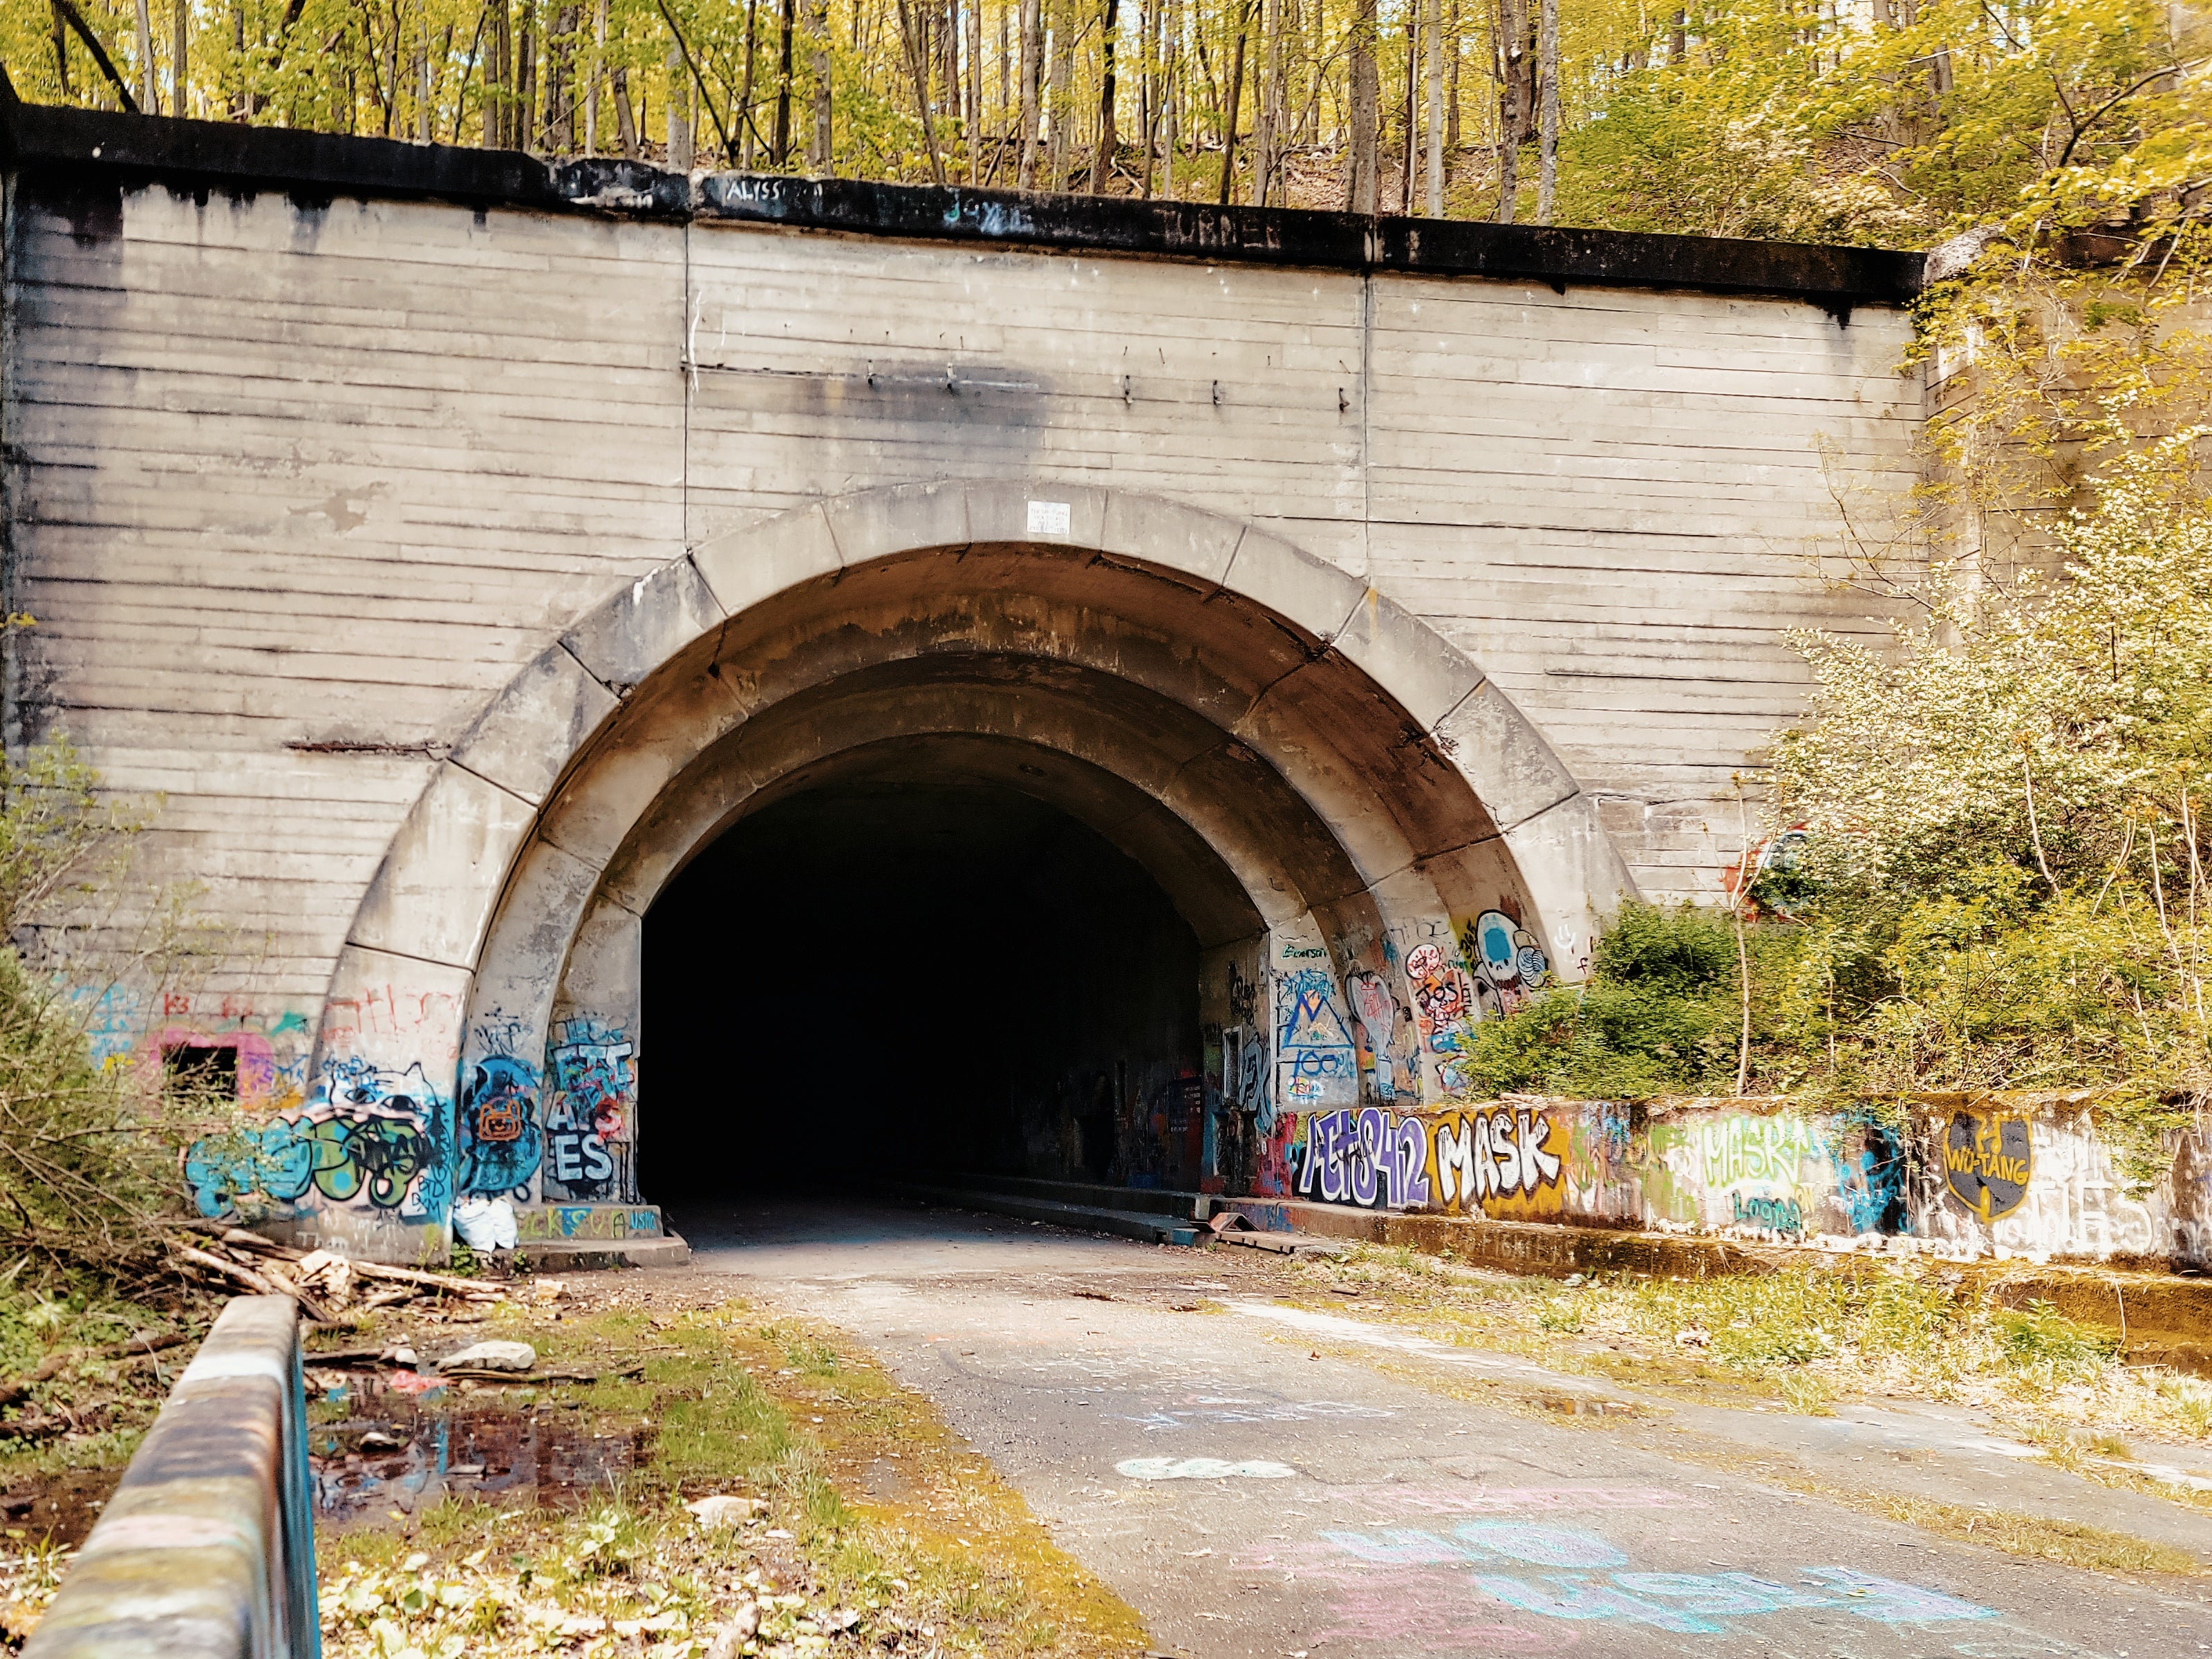 AO Review: Exploring the Apocalyptic Abandoned Pennsylvania Turnpike